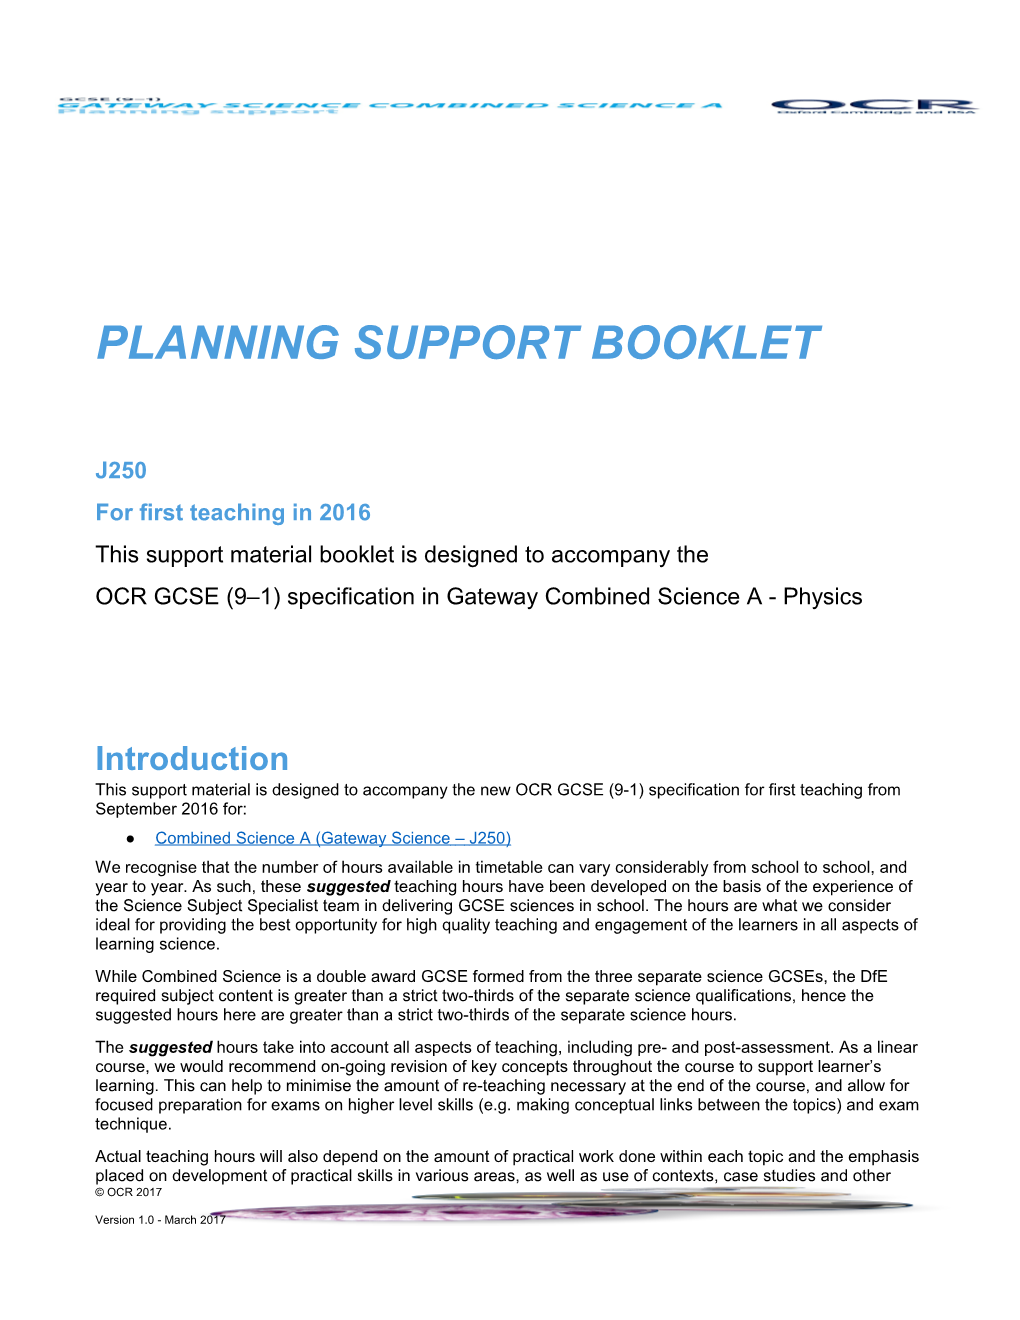 OCR GCSE (9 1) Specification in Combined Science a (Gateway) Support Booklet (Planning Support)